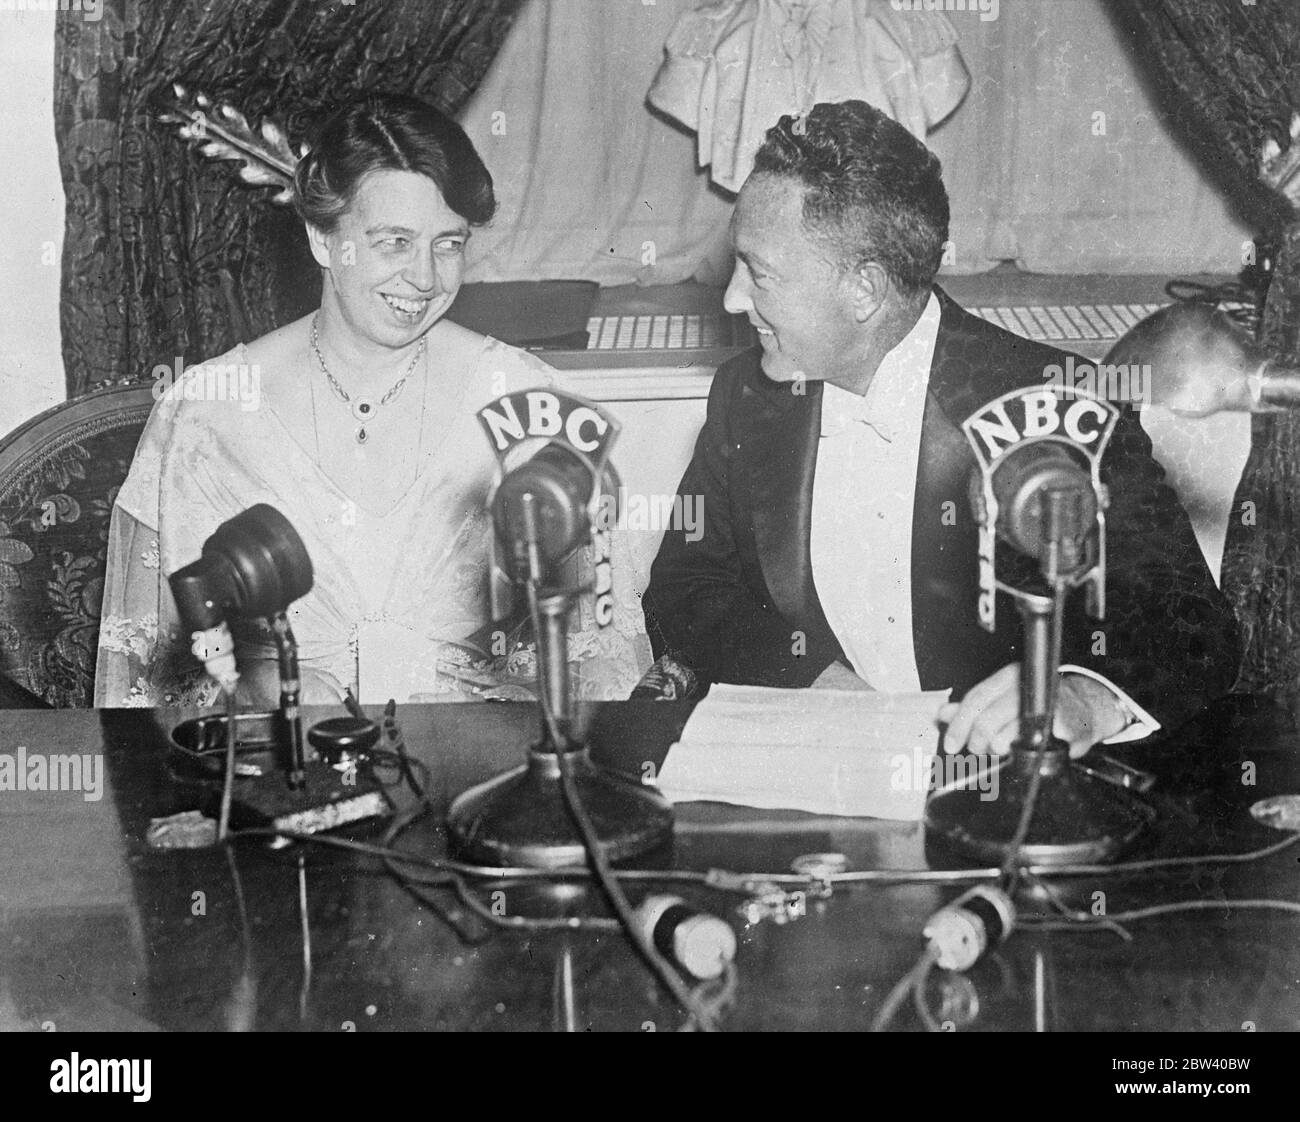 Eleanor Roosevelt and Rear Admiral Byrd deliver a radio peace message on 20th anniversary of America ' s entry into war . Mrs Franklin D Roosevelt , wife of the American president , and rear Adml Richard E Byrd , the polar explorer , delivered a broadcast peace message from the White House . Washington , on the 20th anniversary of America's entry into the Great War / WW1 Photo shows , Miss Roosevelt and rear Adml Byrd at the microphones as they delivered their peace message . 12 April 1937 Stock Photo